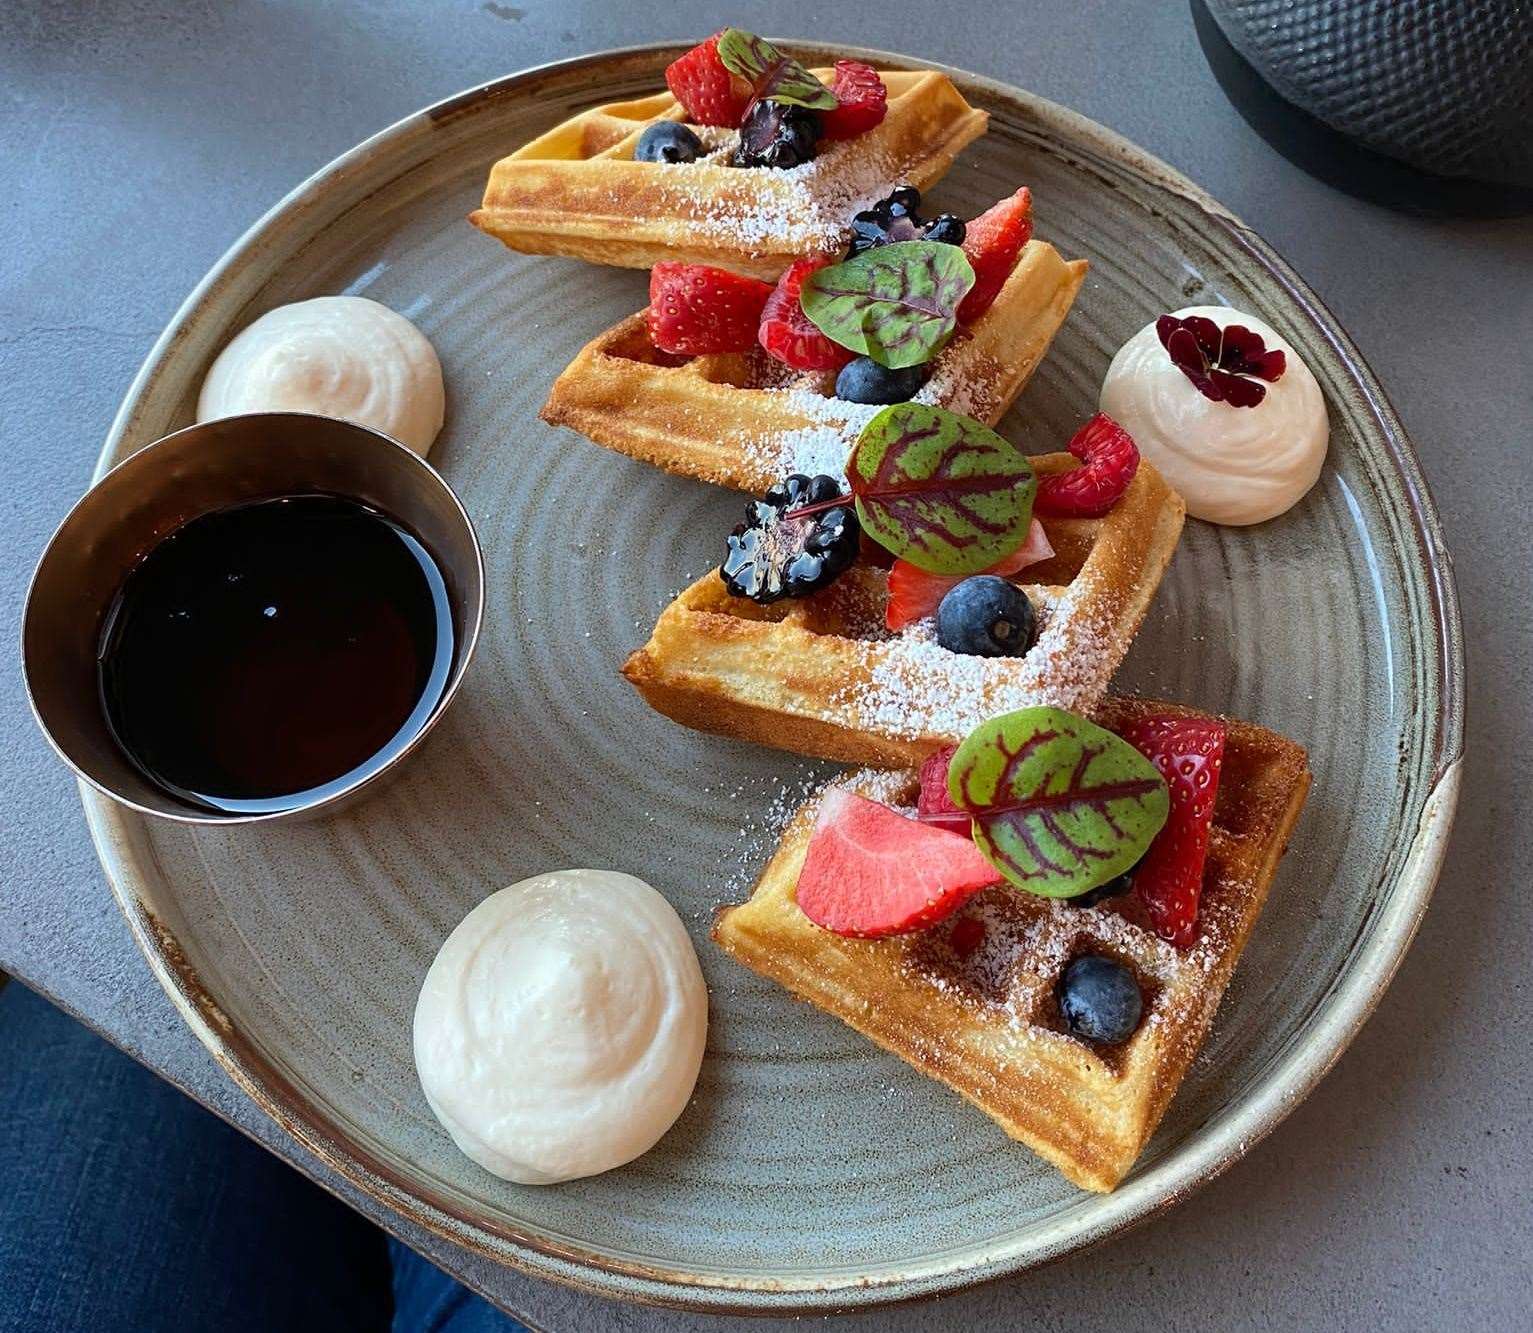 The waffles and berries for breakfast at the Treehouse London